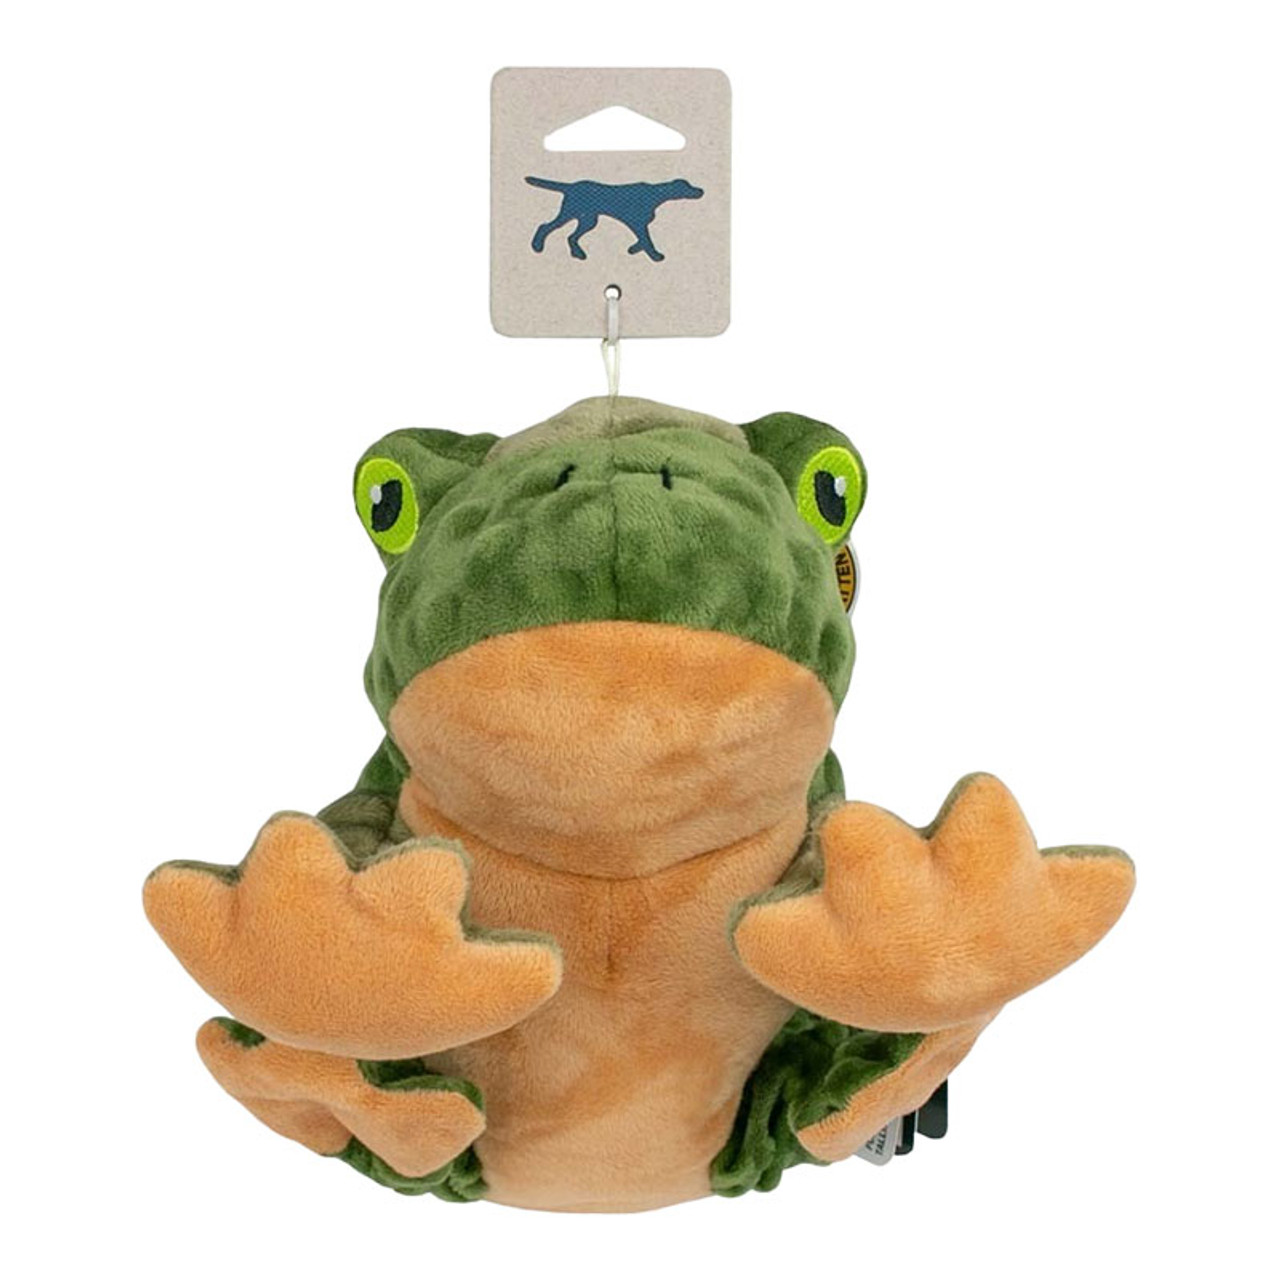 TALL TAILS DOG PLUSH FROG TWITCHY 9 - The Shoppes at Steve's Ace